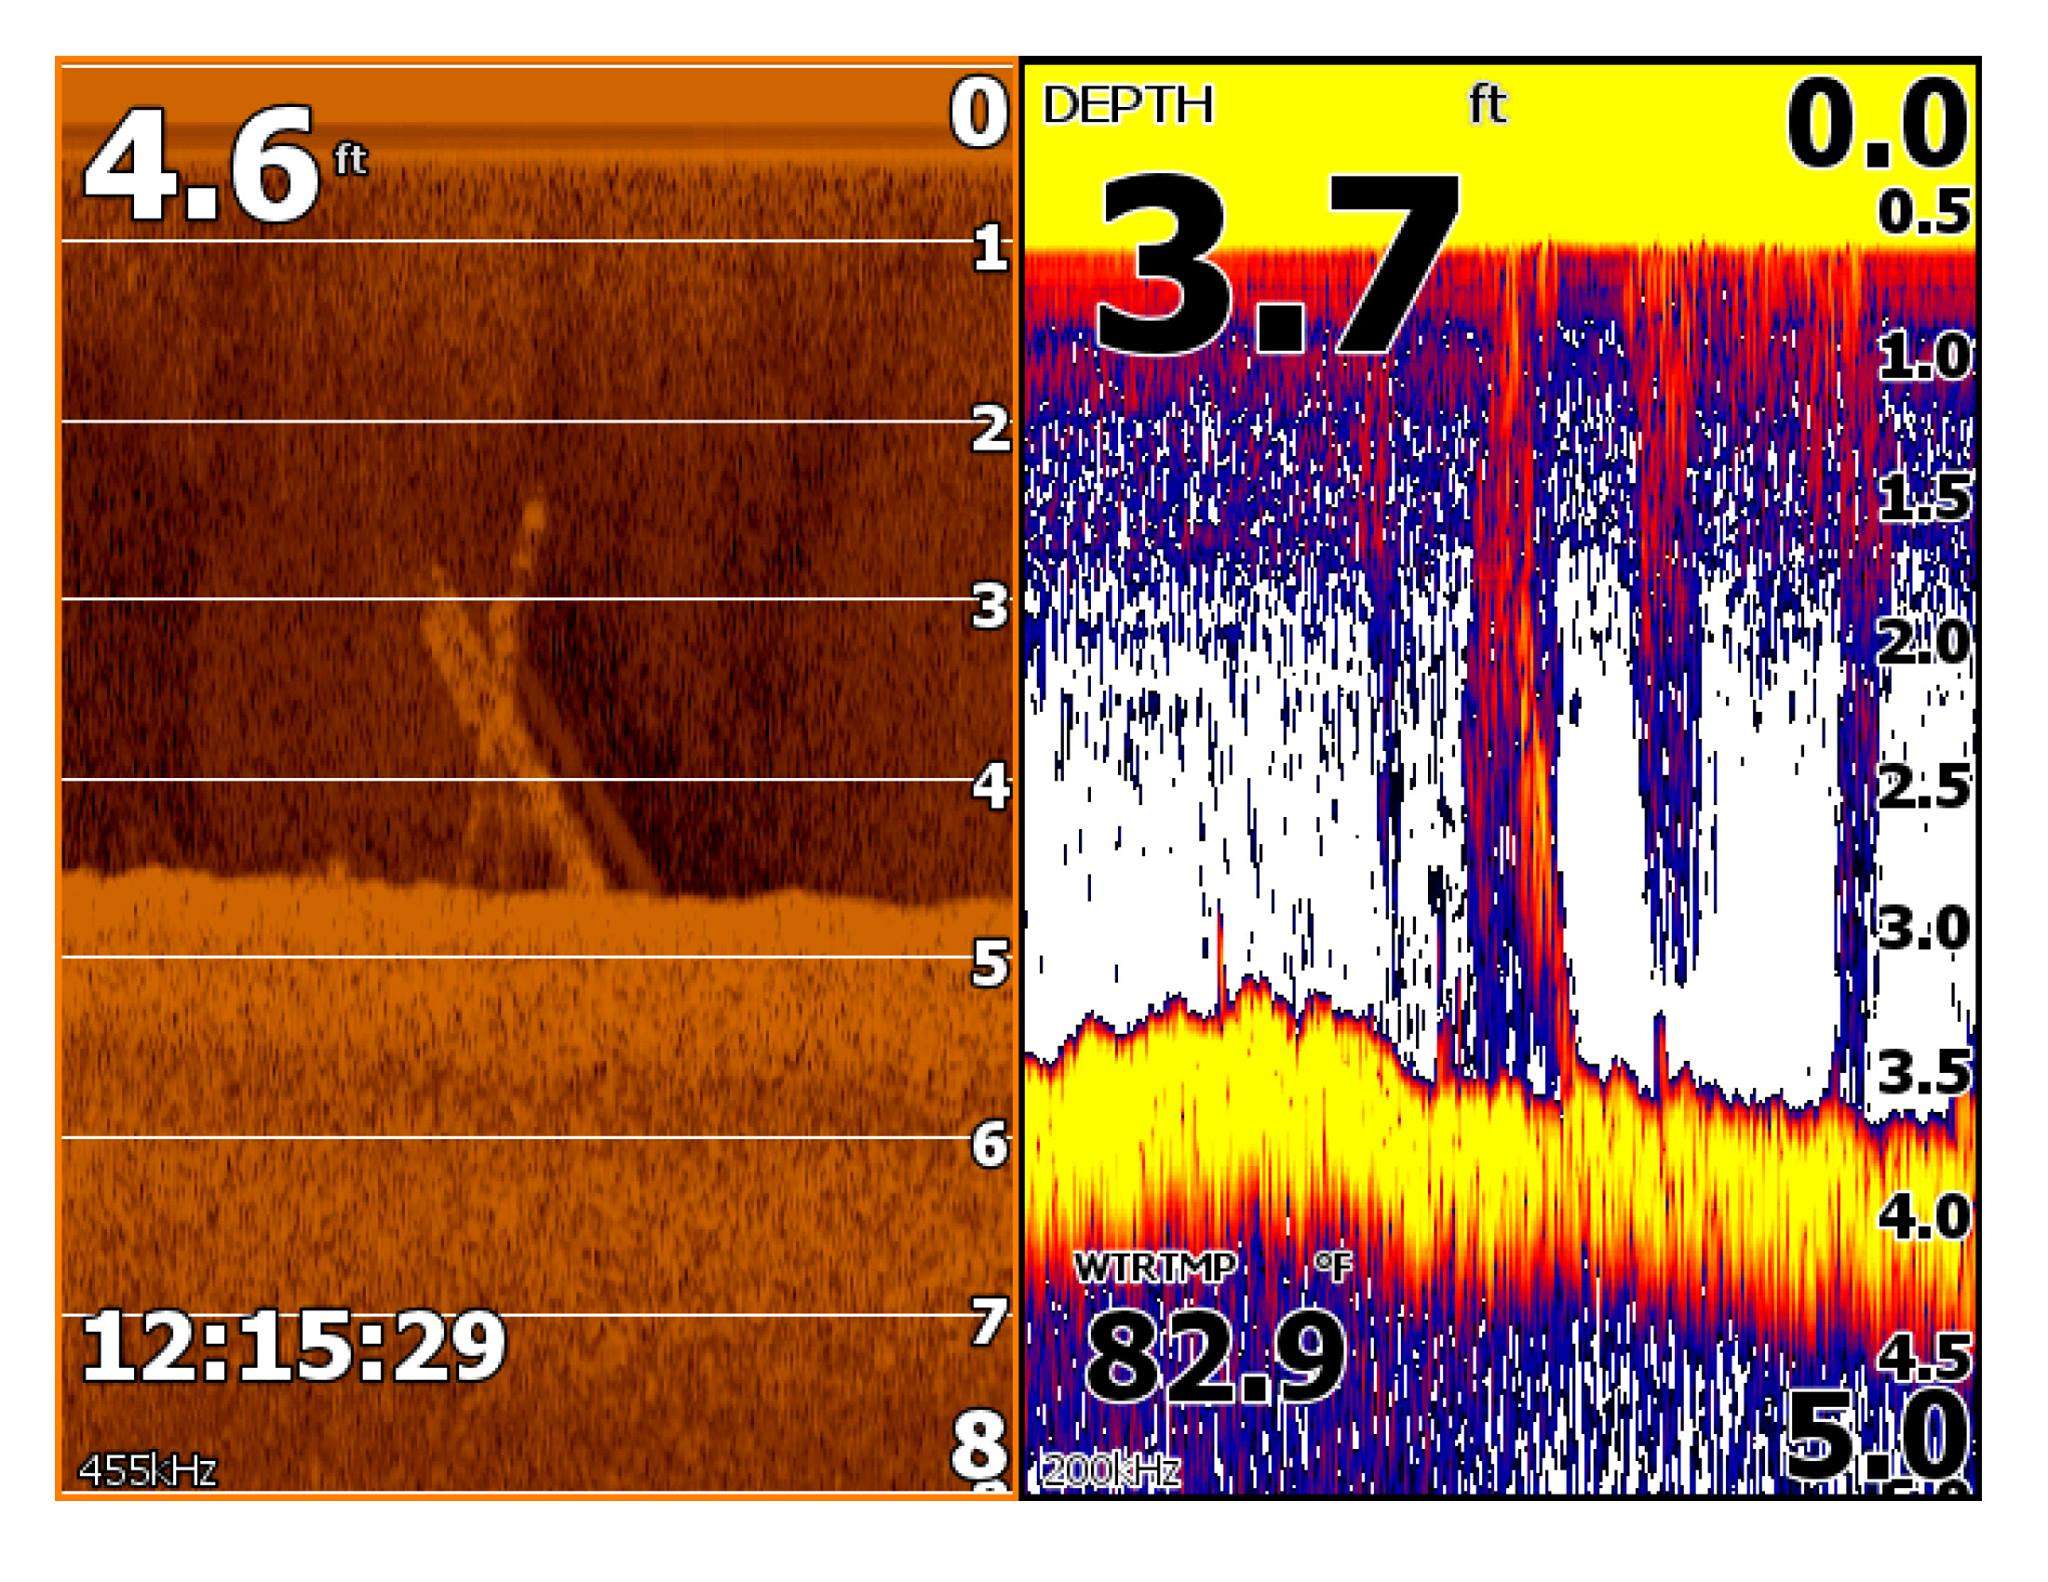 Sonar and DownScan images showing BASSJax.